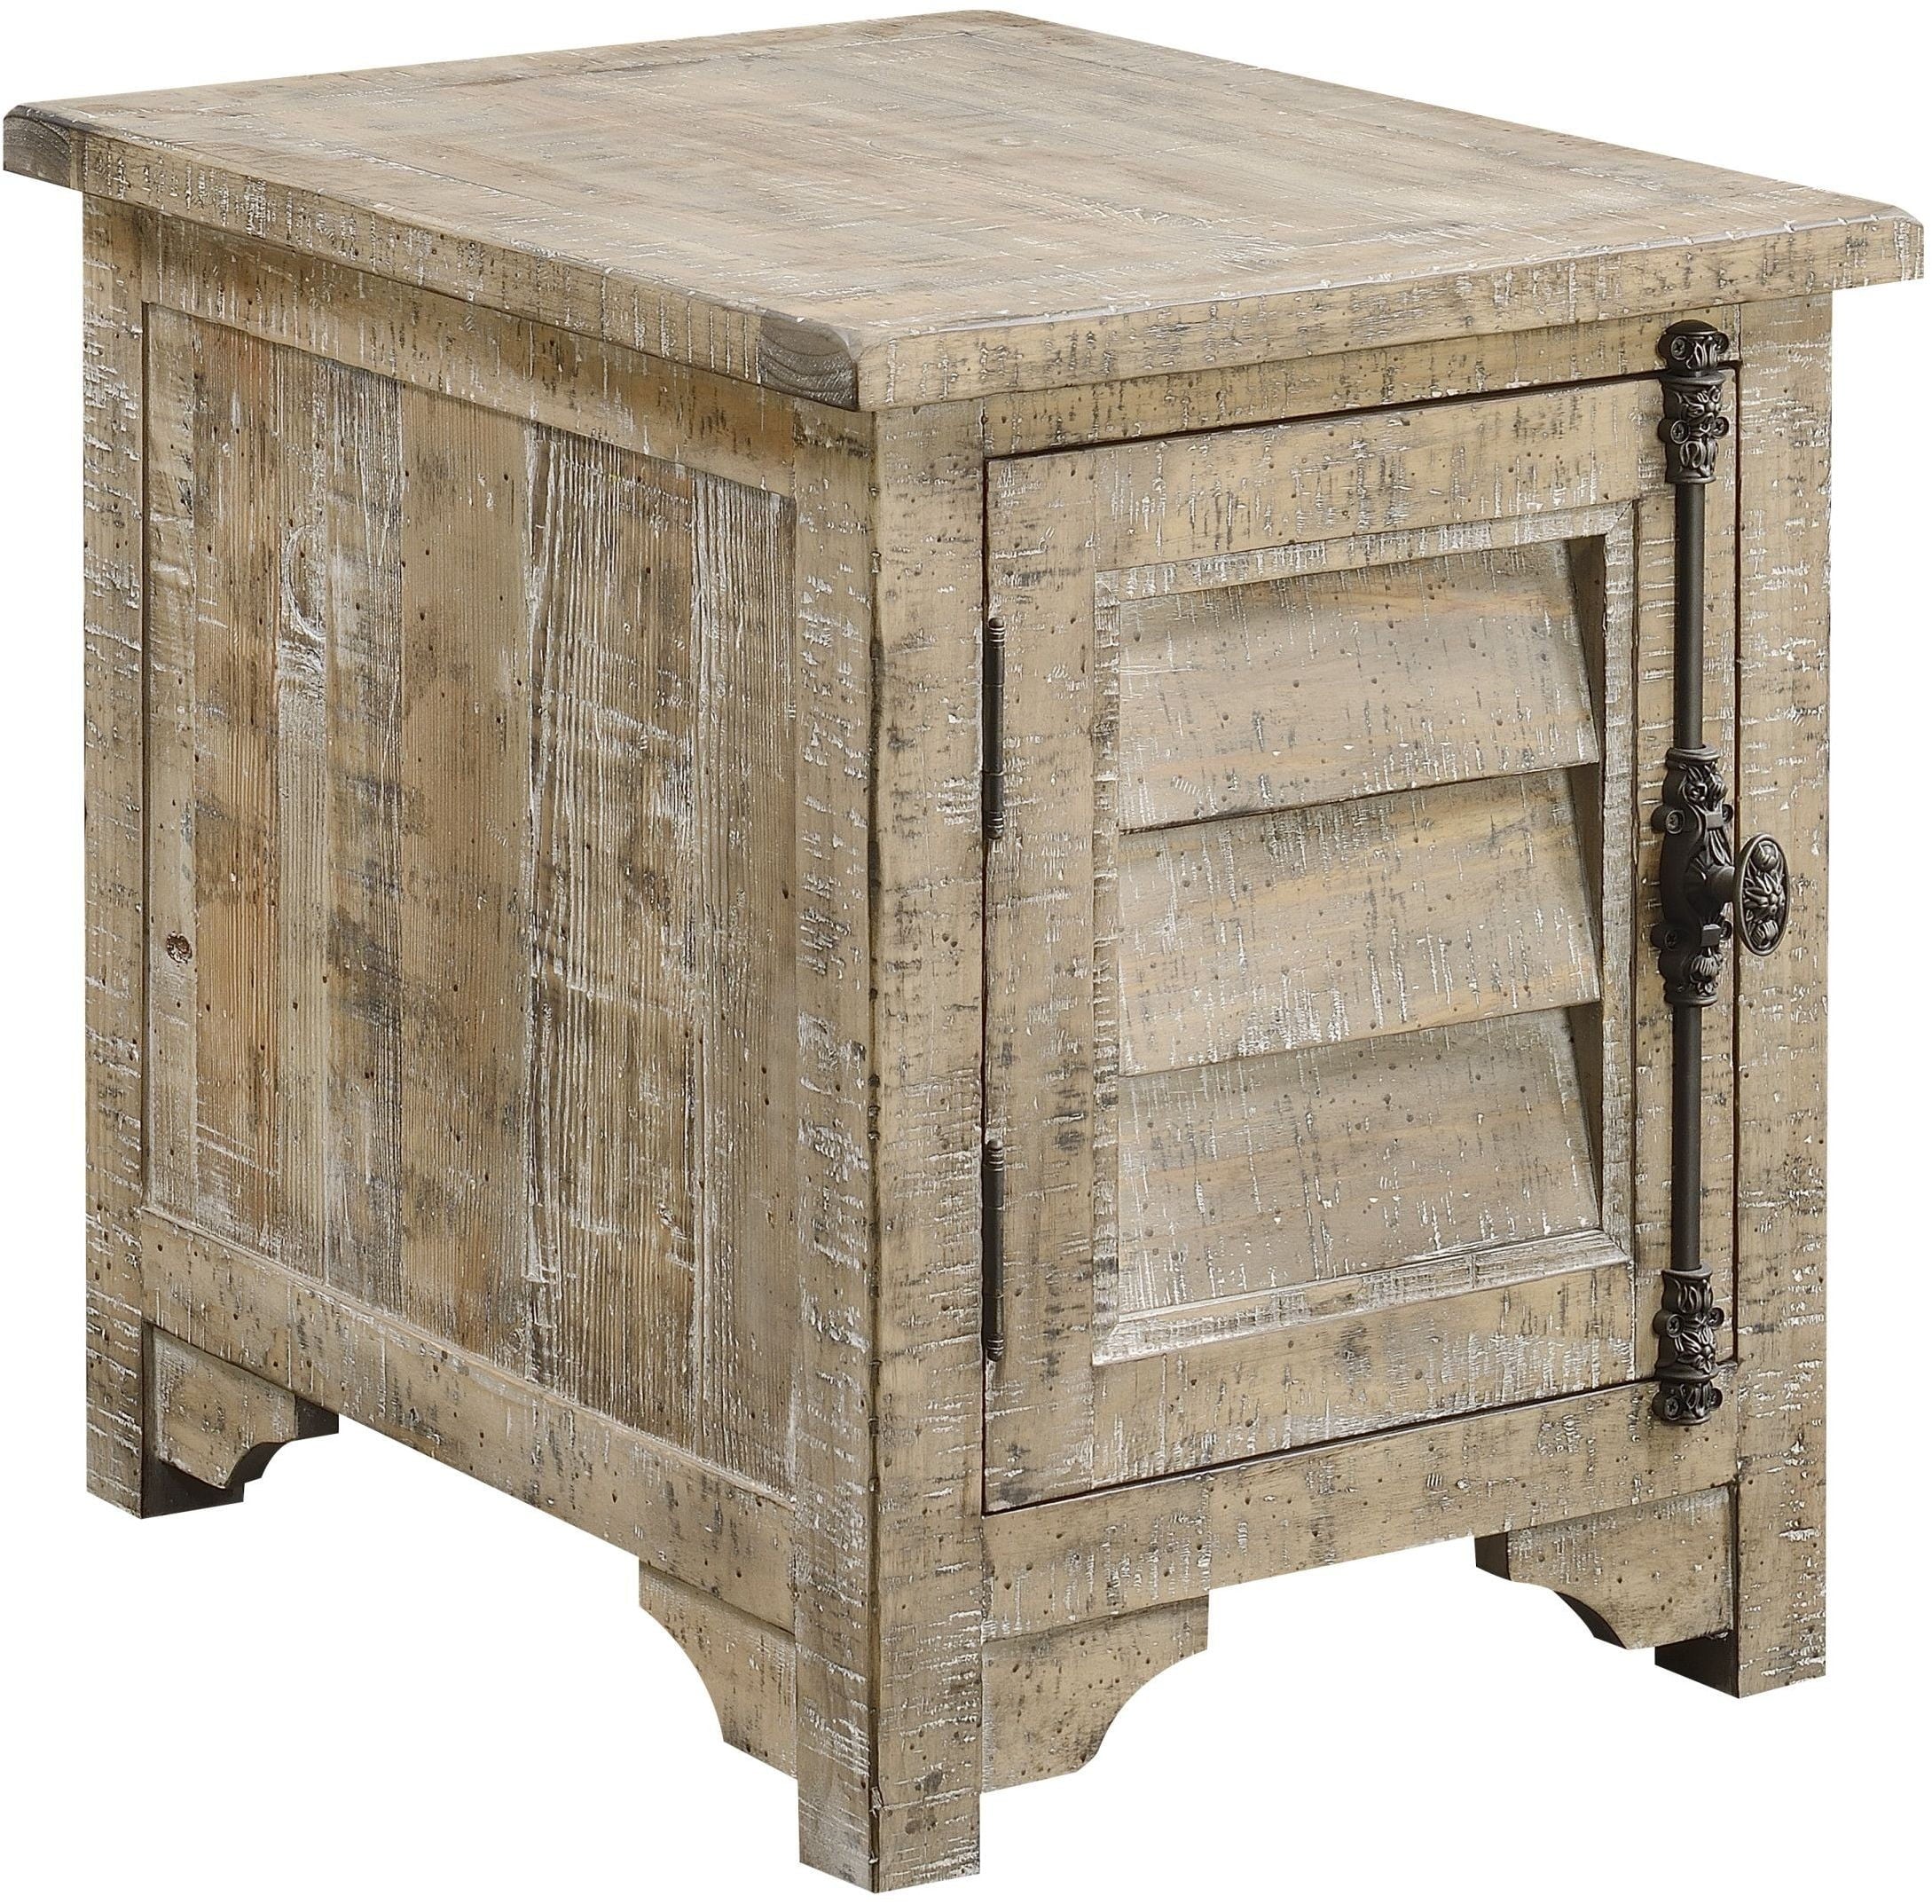 Interlude Collection Rustic Farmhouse Chairside Table